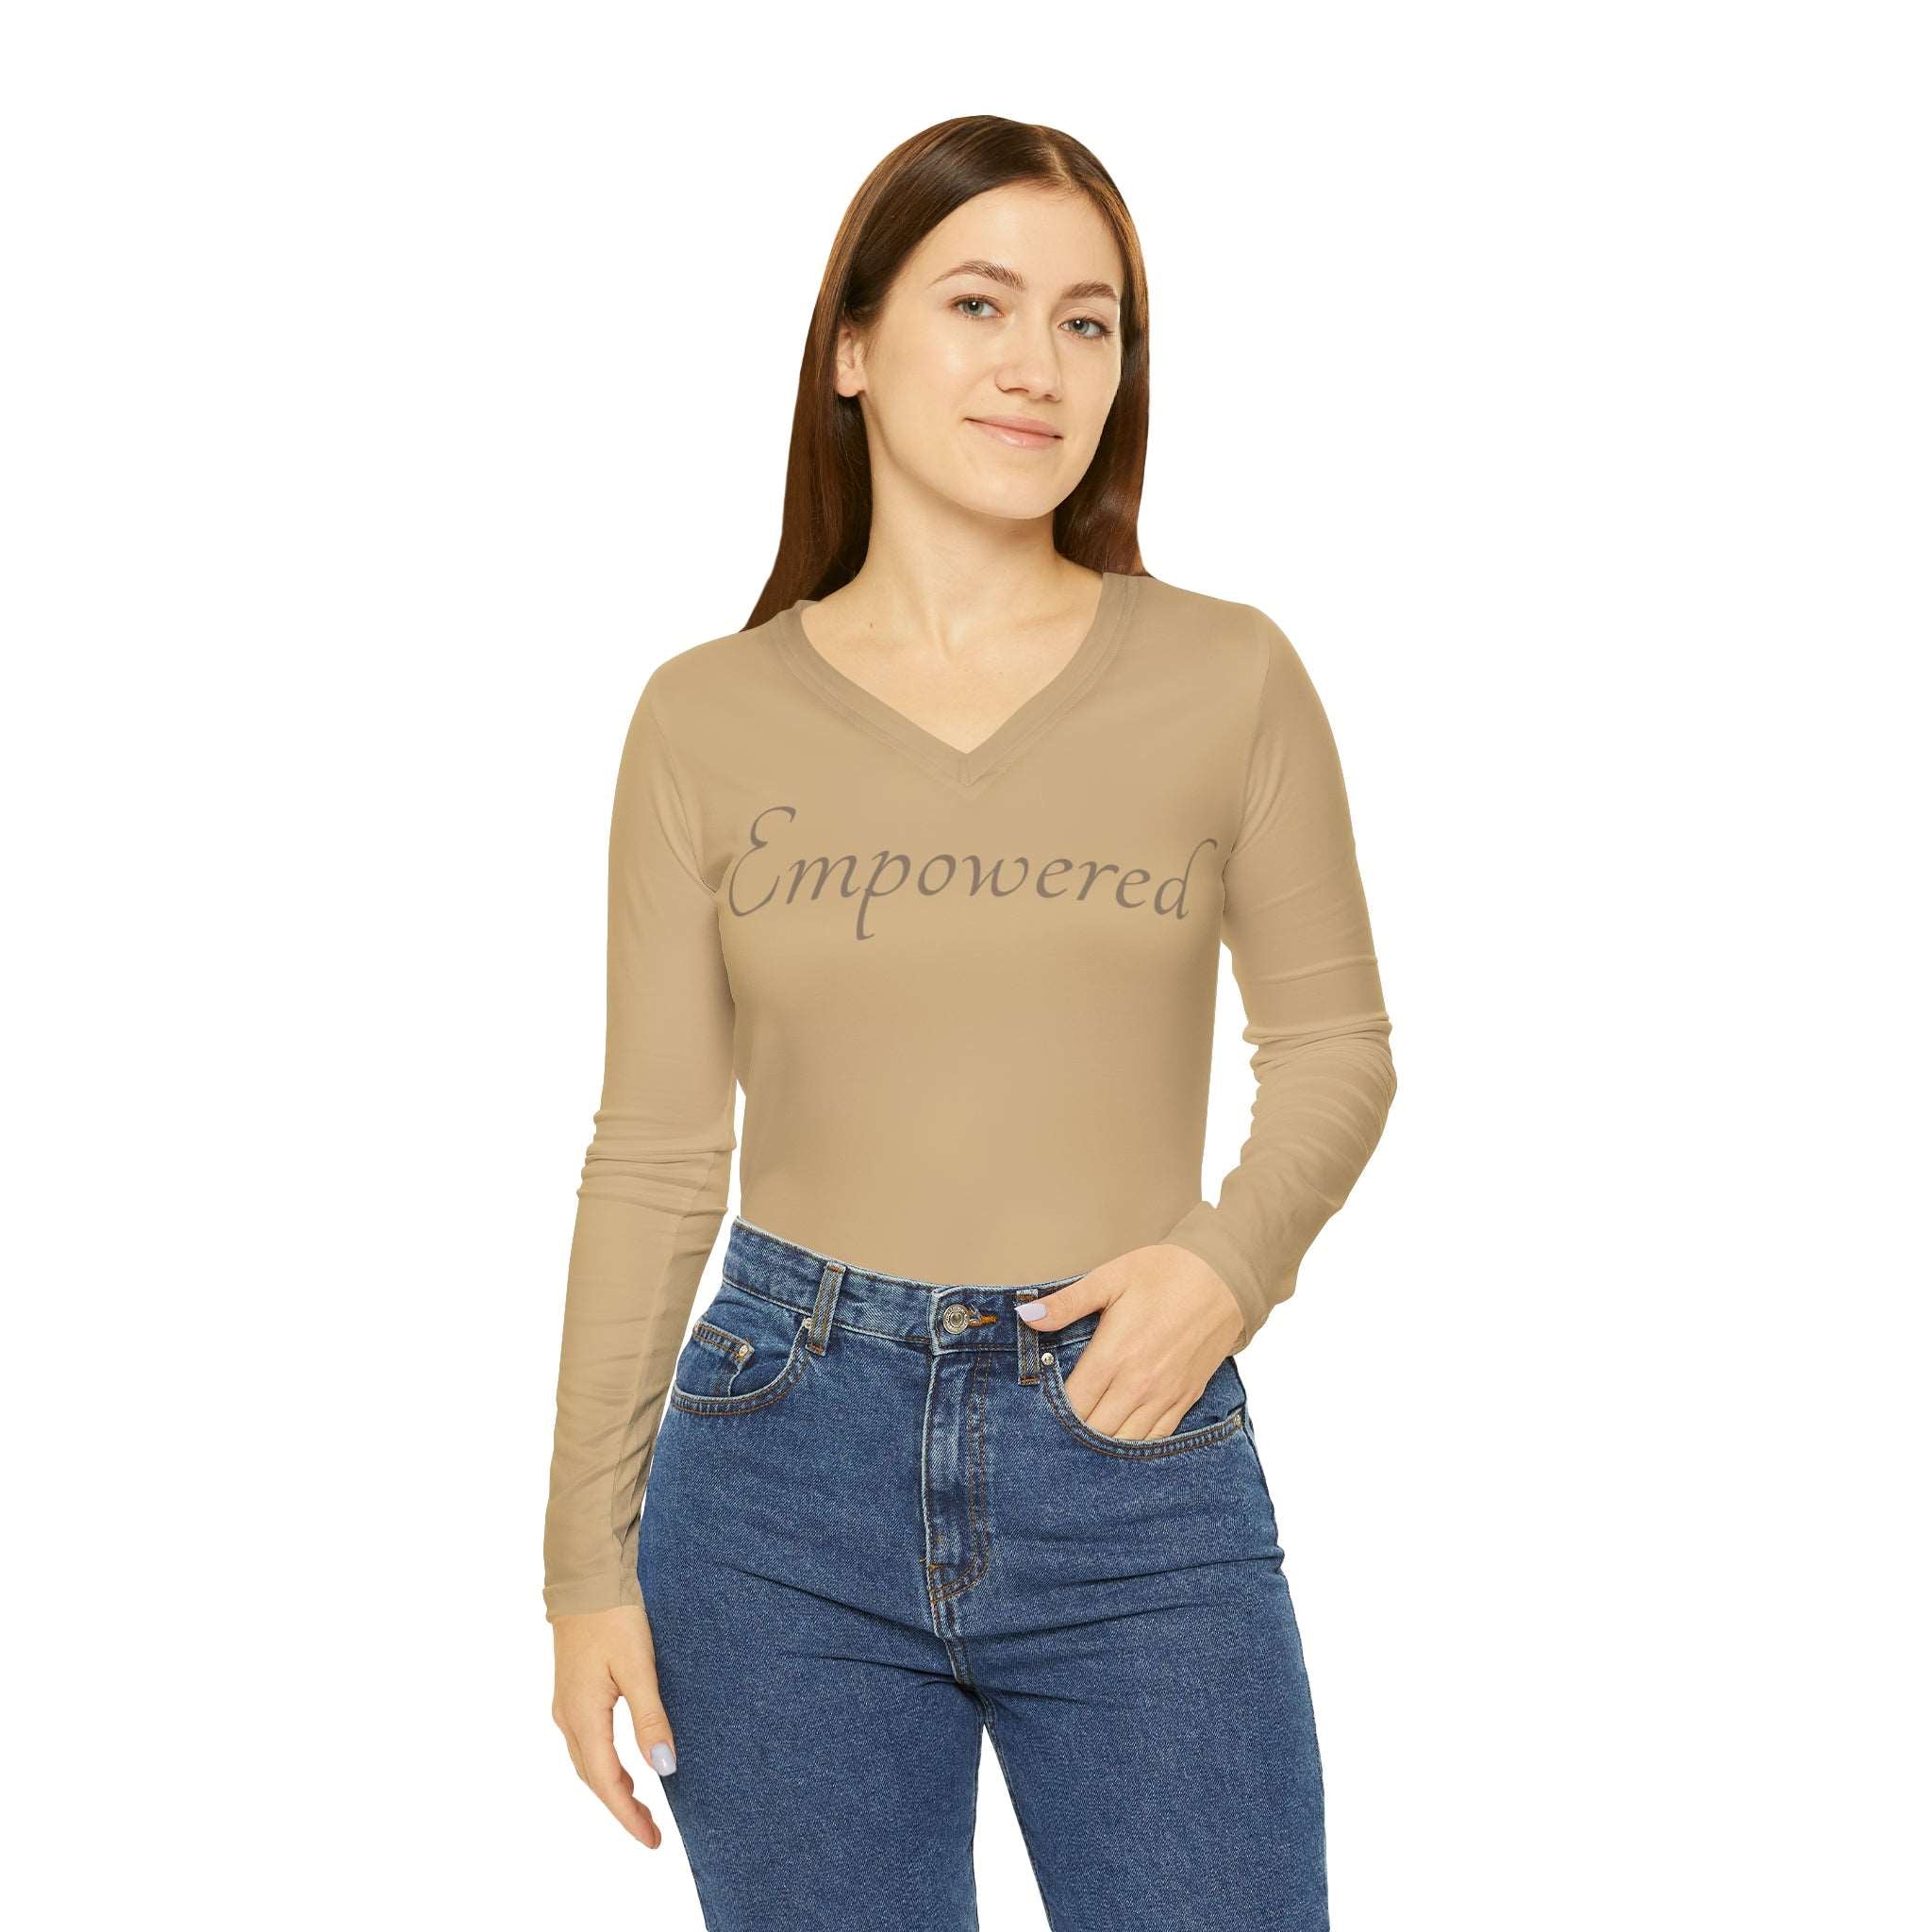 Empowered Long Sleeve V-neck: Comfort & Style Casual Shirt Double Needle Stitching Empowerment Shirt Everyday Wear Long Sleeve V-neck Mental Health Support Polyester Spandex Blend Statement Shirt Tee for Women All Over Prints 1529646771225461852_2048_2c5118d3-6531-4f64-b466-4dcd6bcd0930 Printify